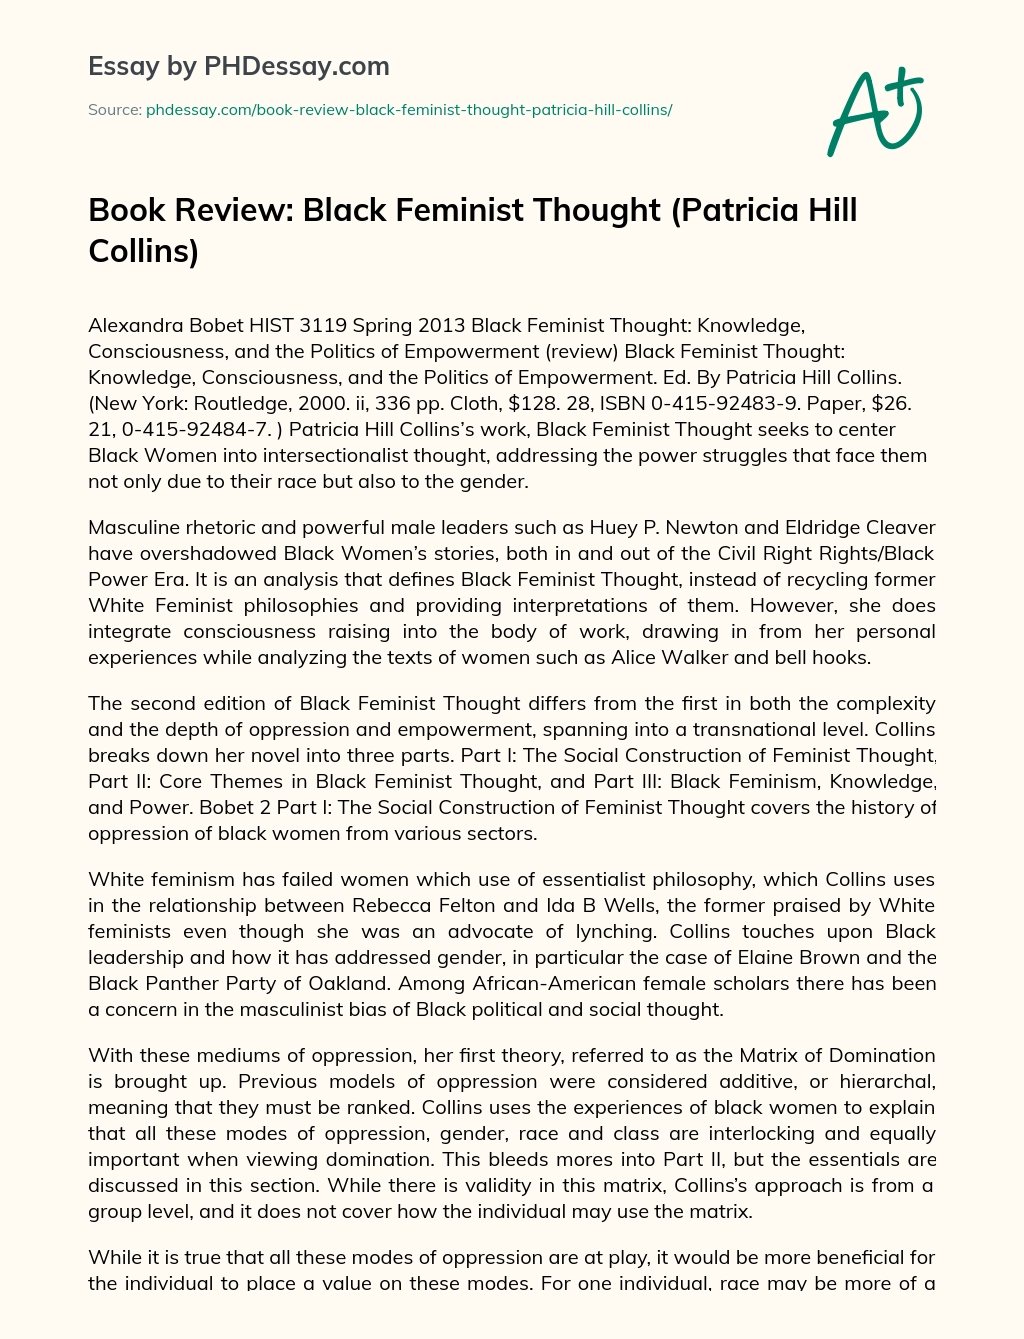 Book Review: Black Feminist Thought (Patricia Hill Collins) essay